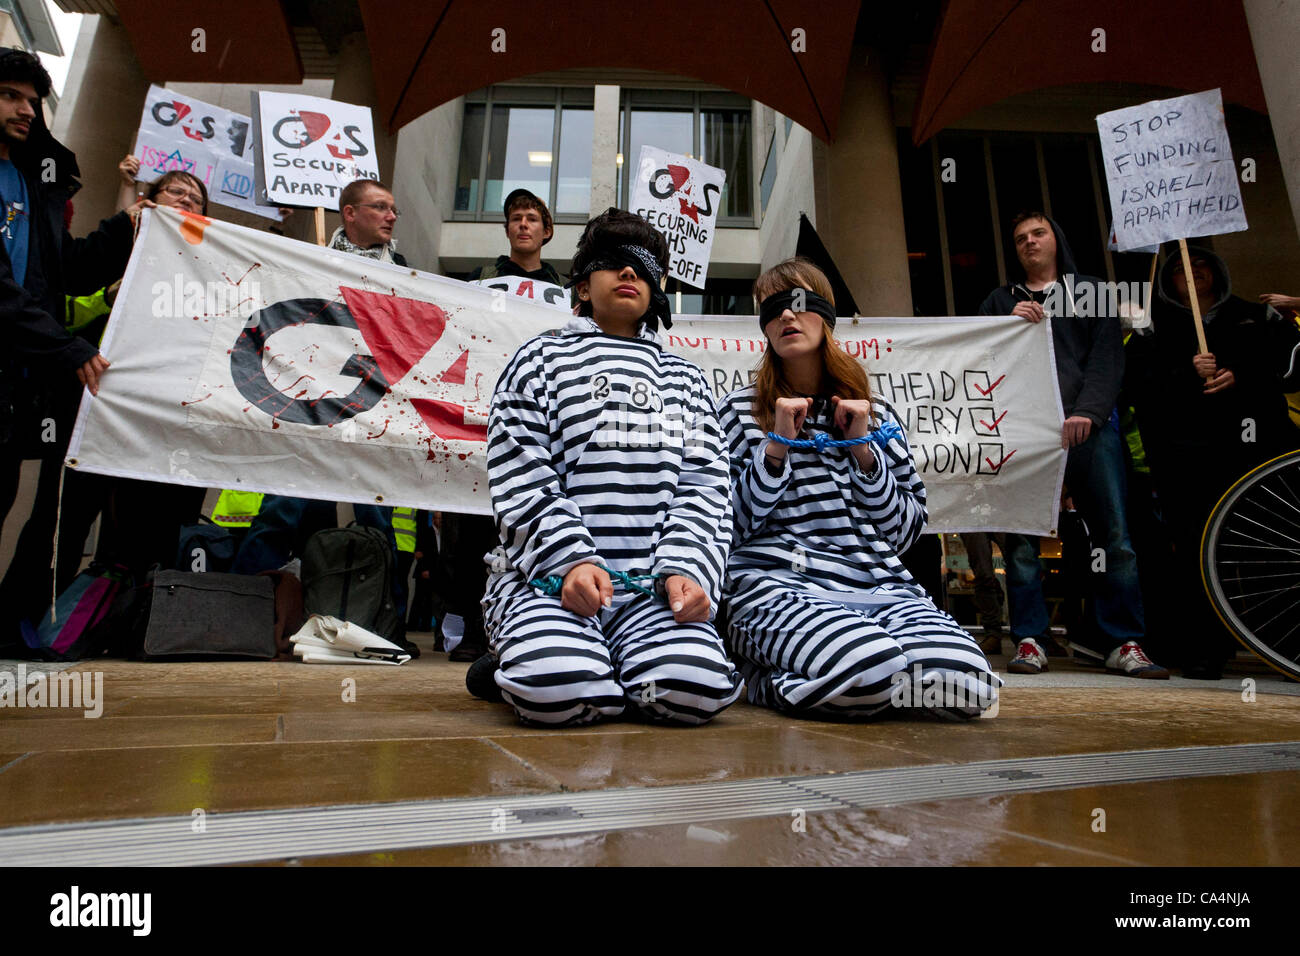 London, UK. 07th June 2012. Activists from different movements dressed as prisoners outside London Stock Exchange, in Paternoster Square where the private security company 'G4S' held the Annual General Meeting. Protesters accuse G4S of human rights abuse throughout the world. Stock Photo